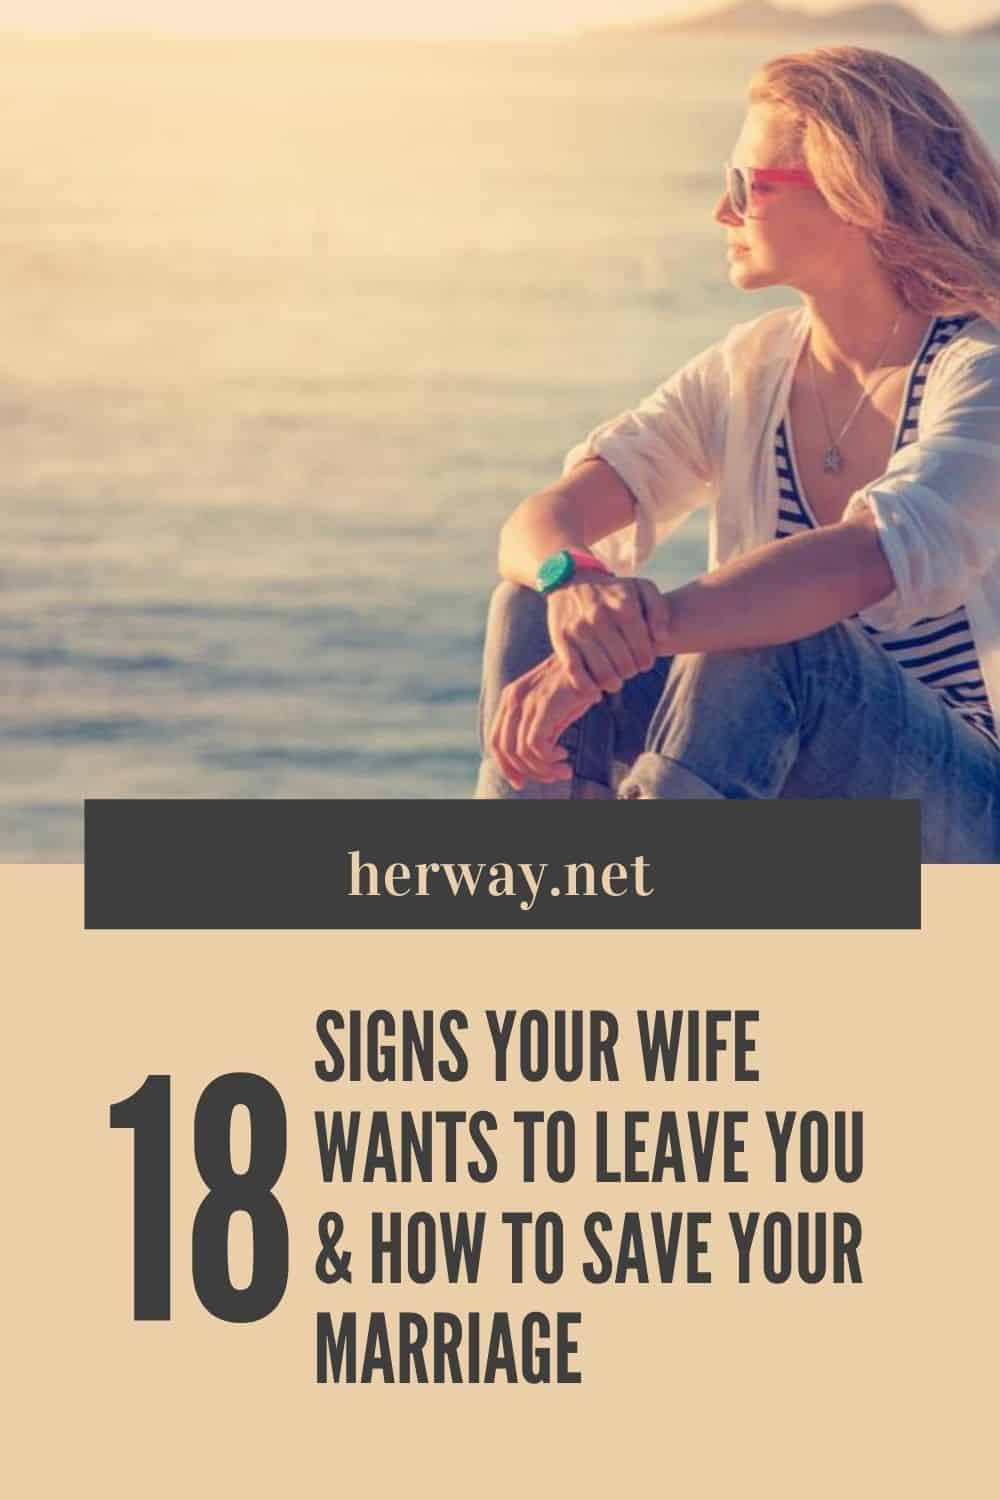 18 Signs Your Wife Wants To Leave You & How To Save Your Marriage